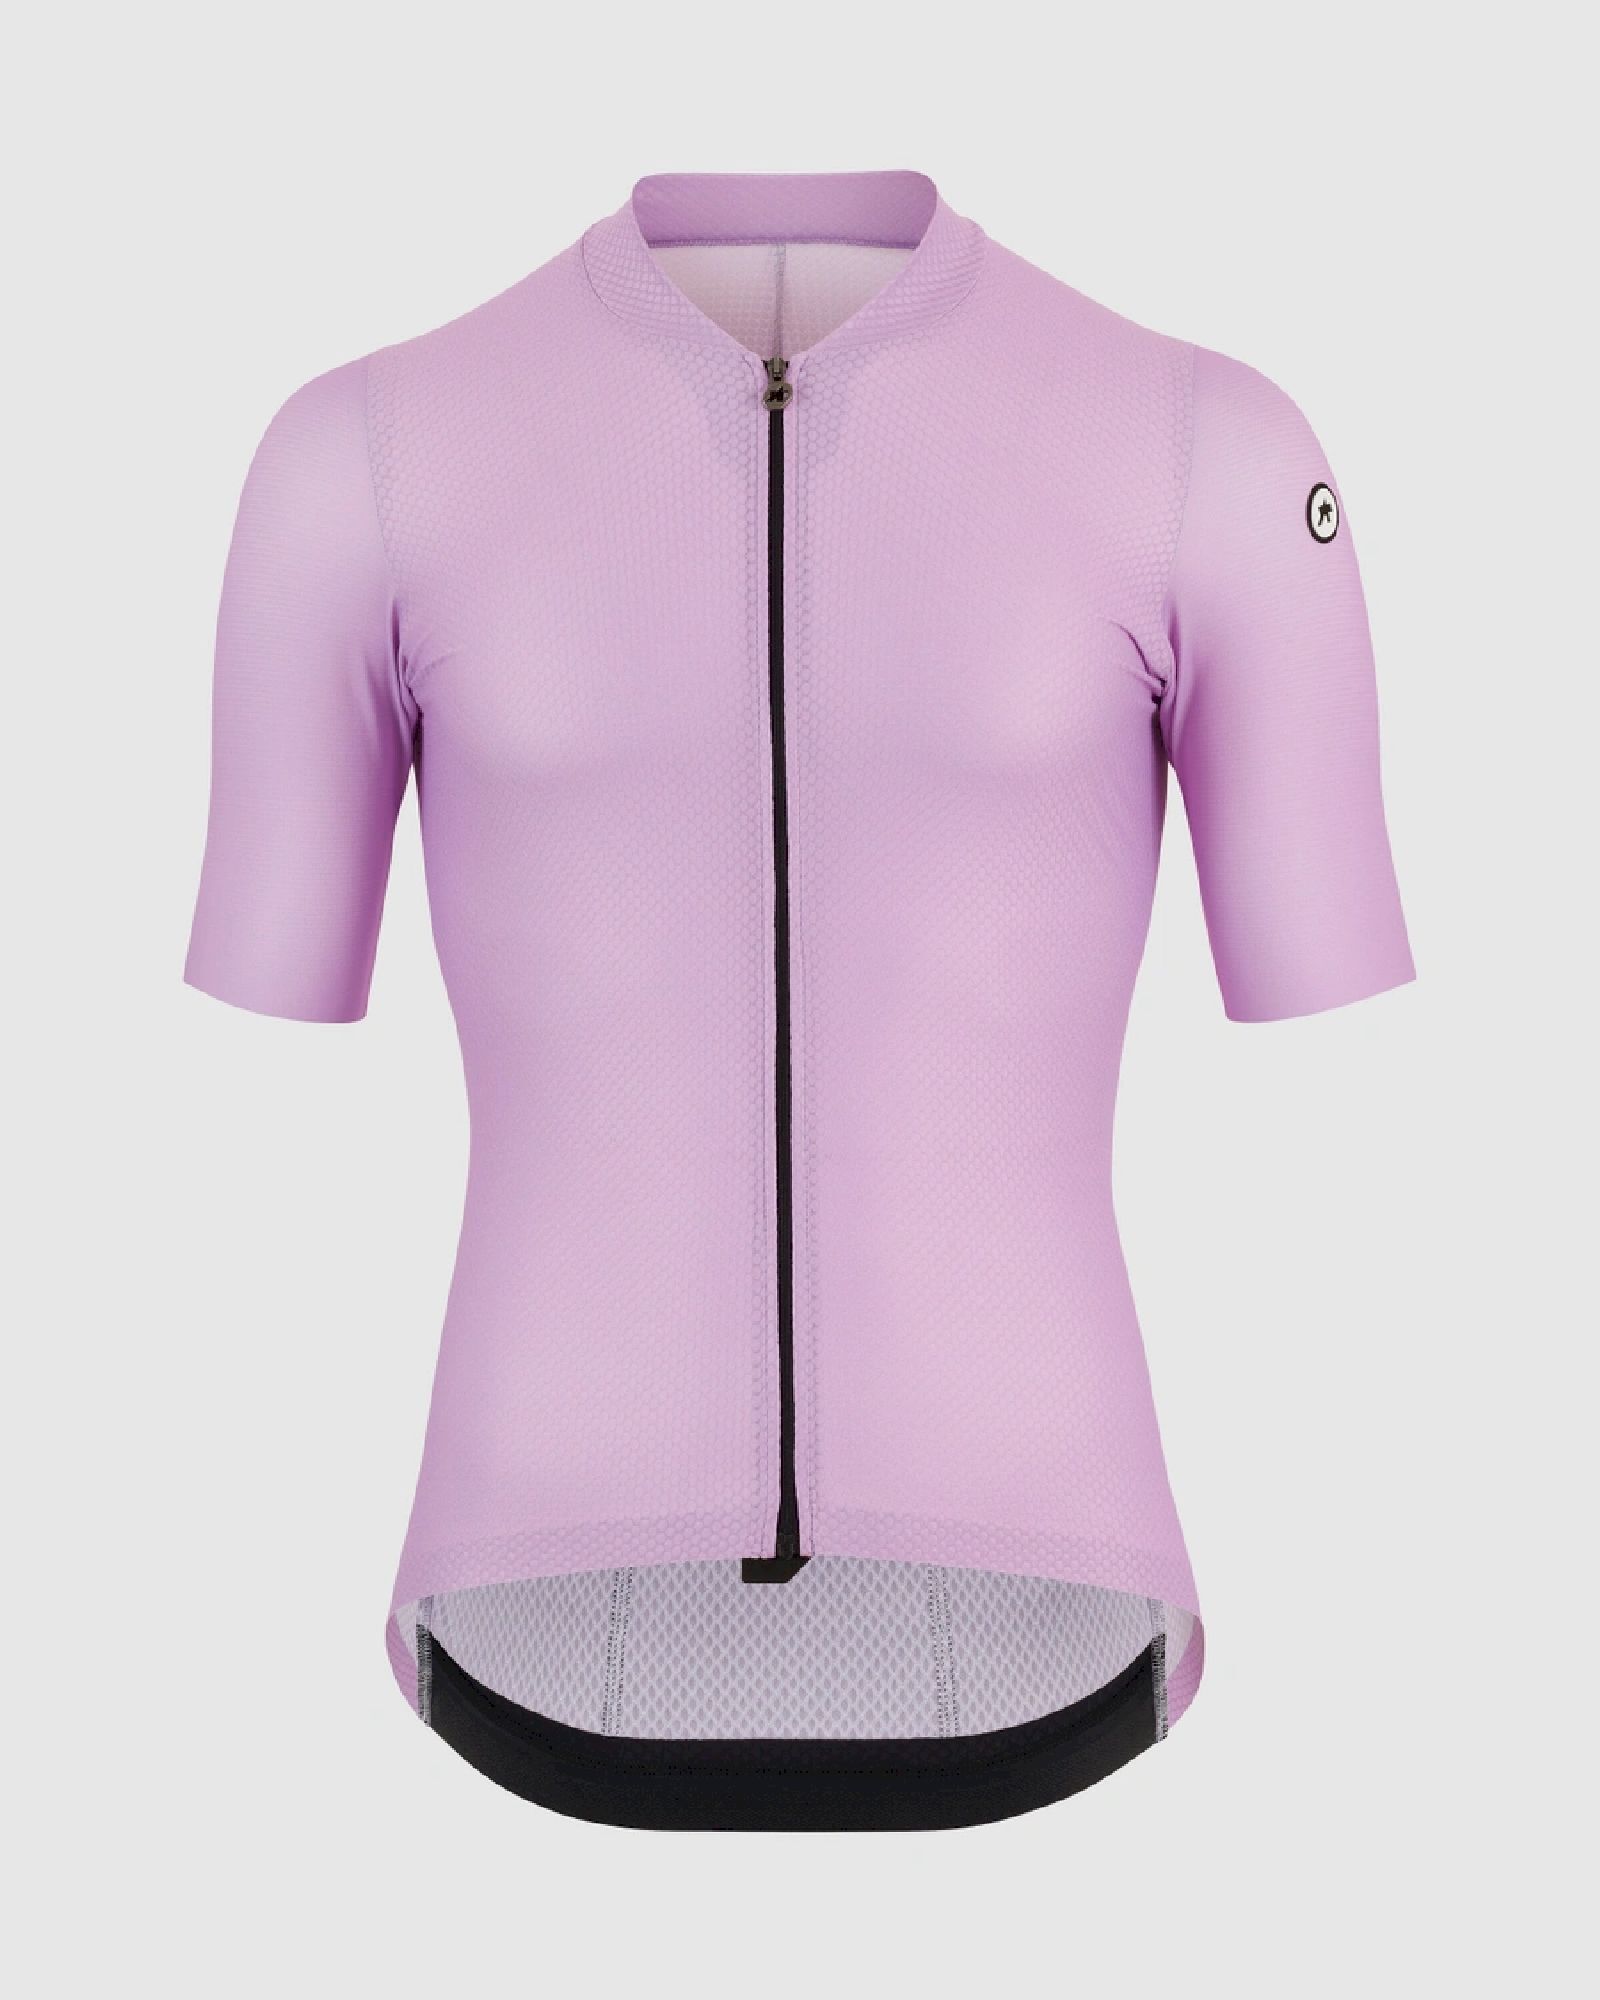 Assos Mille GT Drylite Jersey S11 - Maglia ciclismo - Uomo | Hardloop